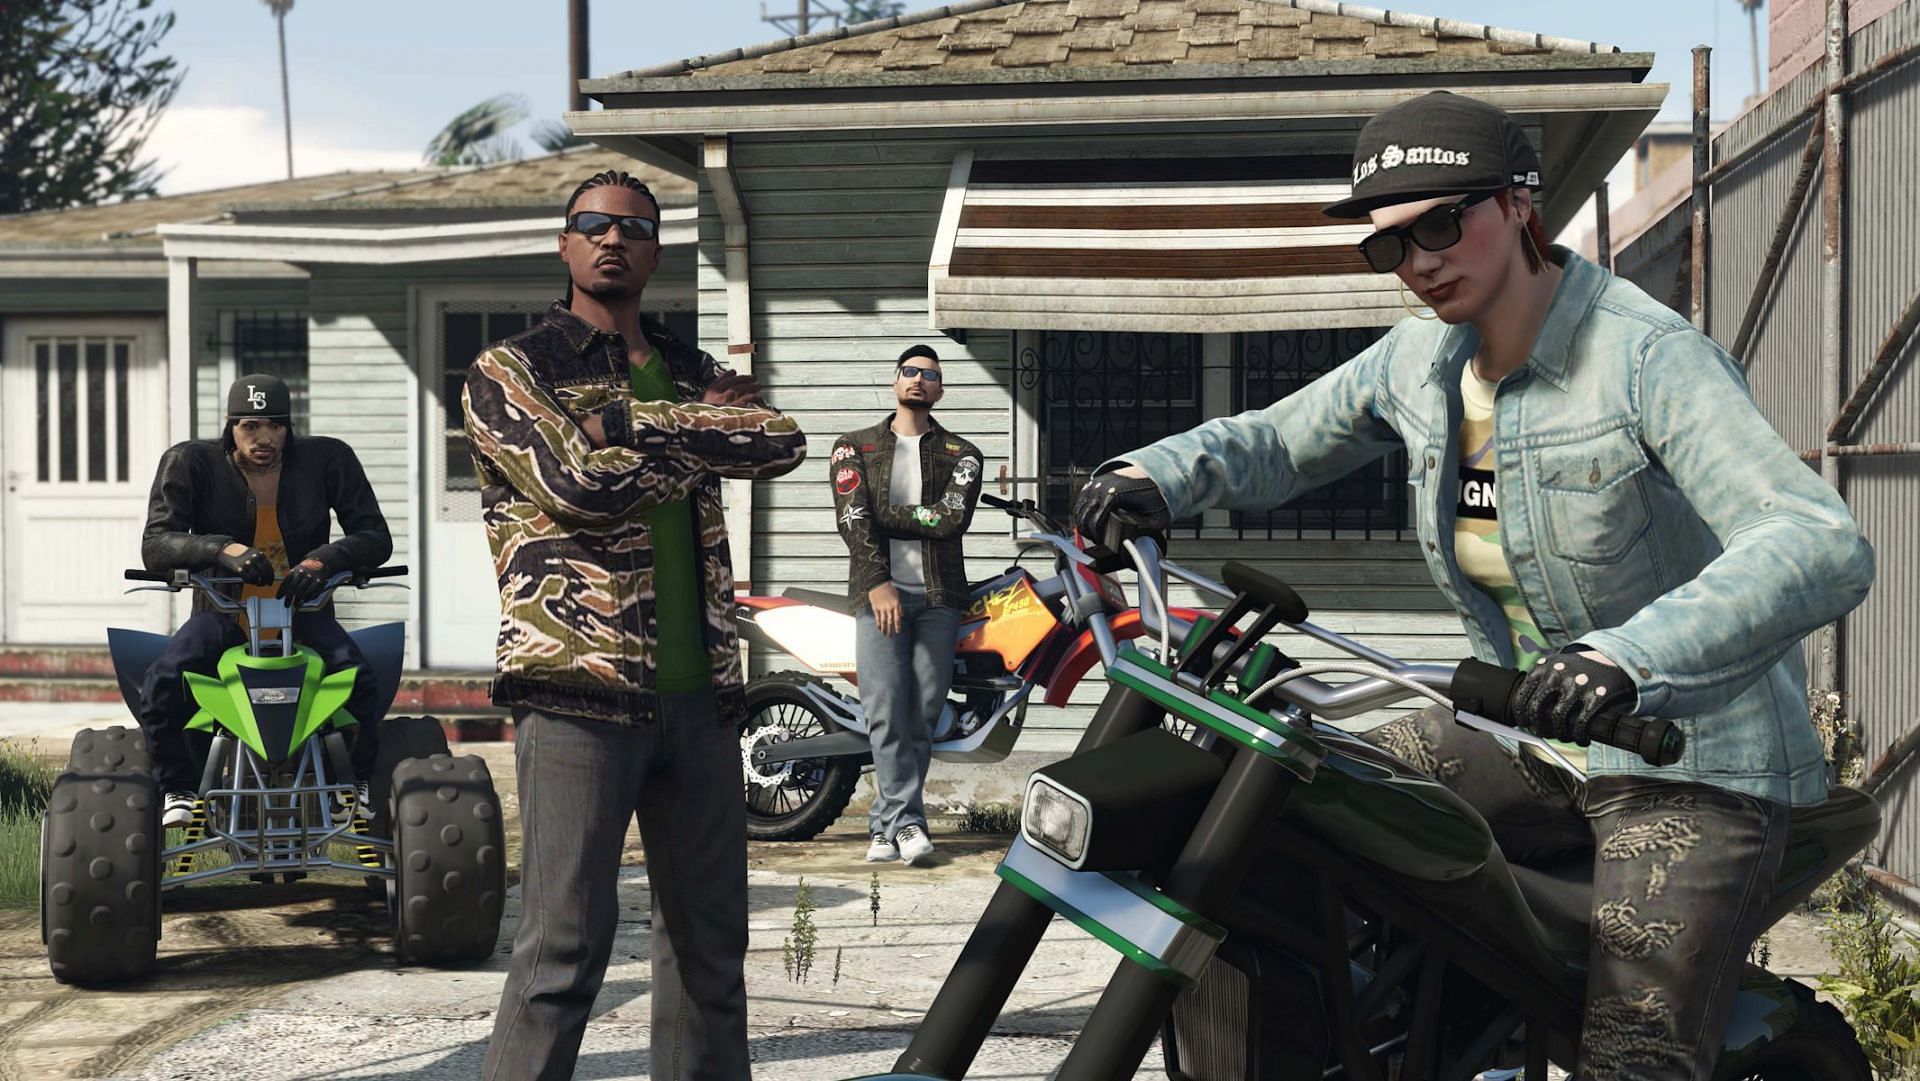 GTA 6 Leak May Have Revealed A Major Change To The Inventory System